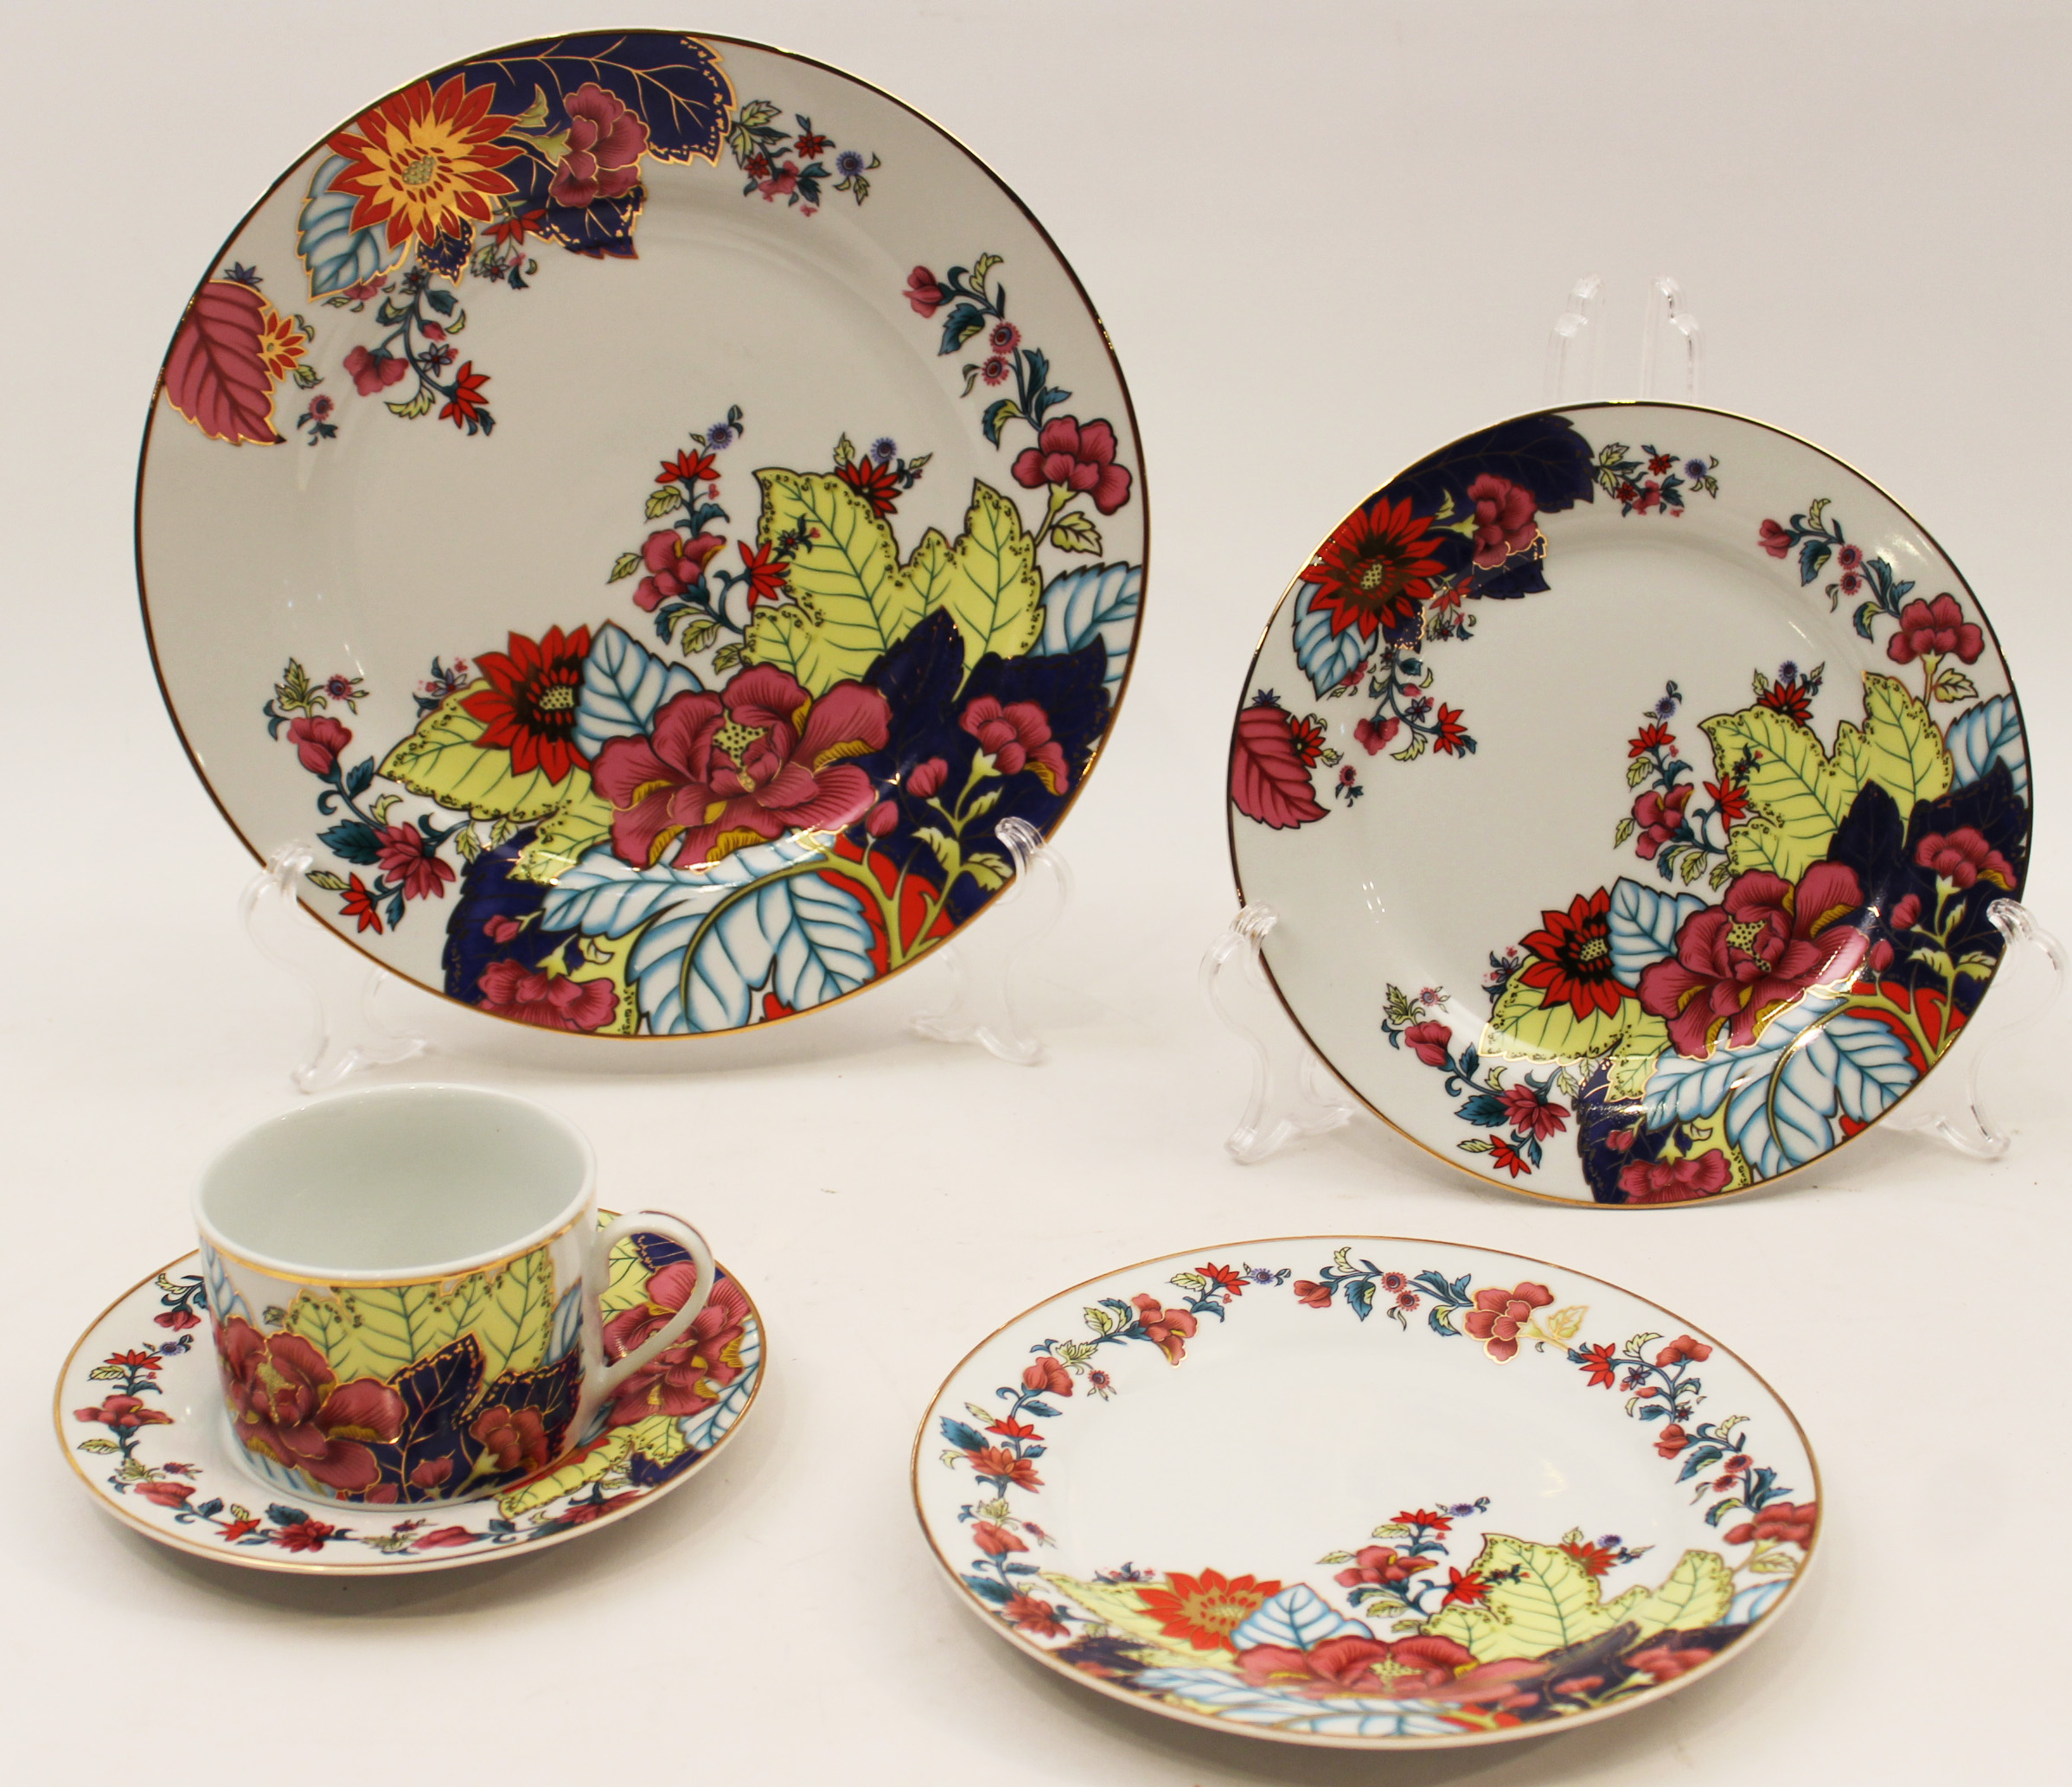 5 PC PLACE SETTING FOR 16 PORCELAIN 35f6cb